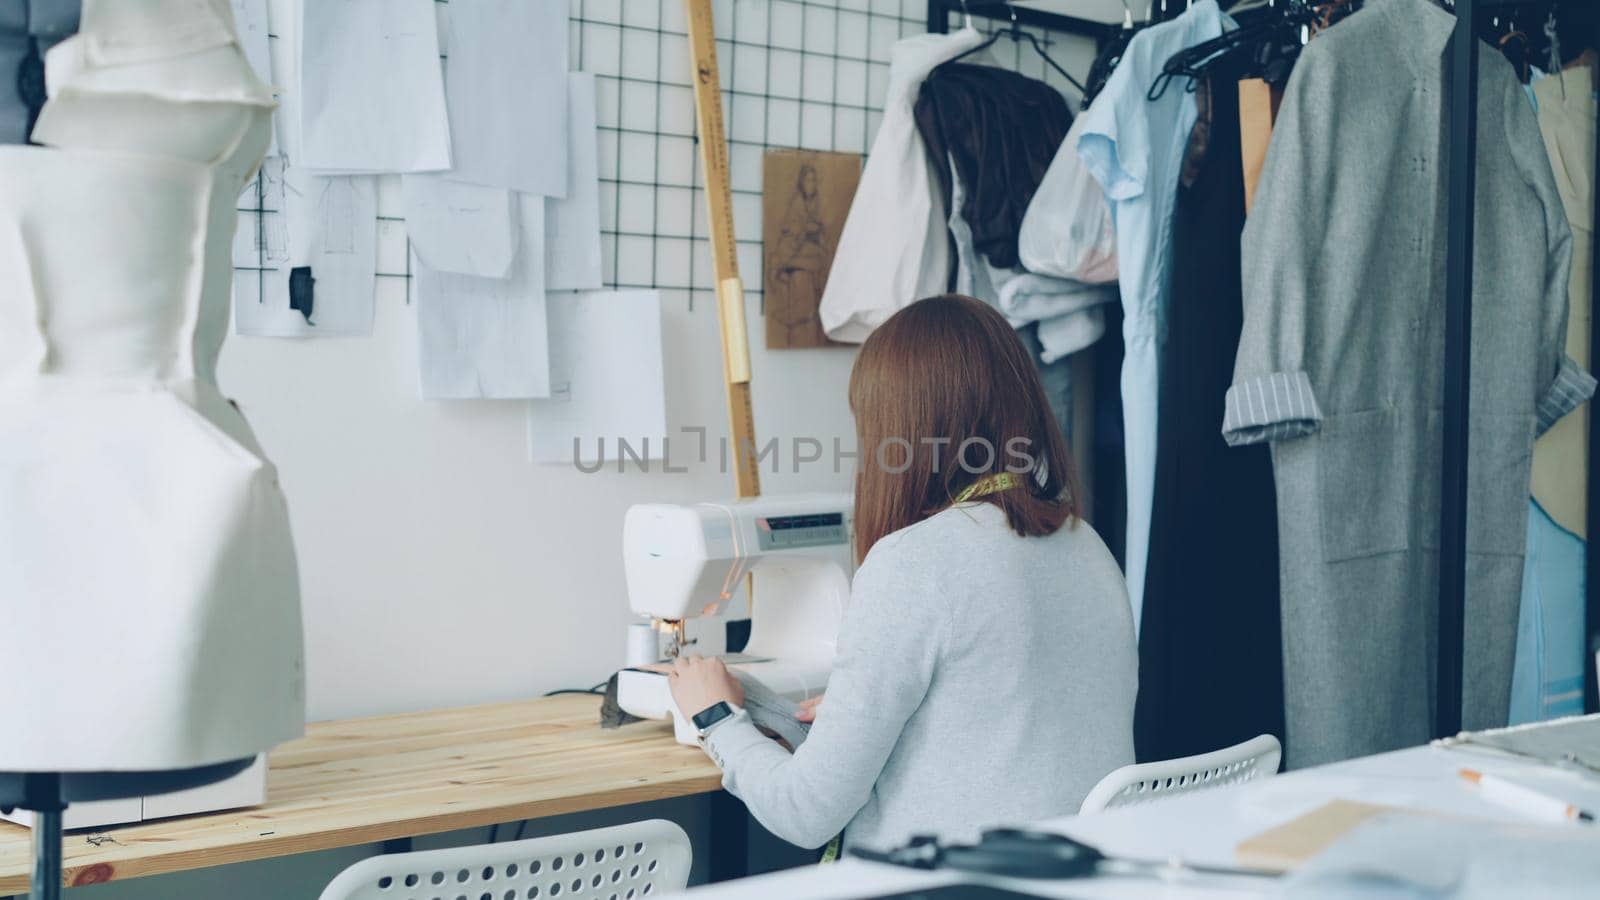 Back view of young woman clothing designer working with sewing machine sitting at studio desk. Sewing items, tailoring dummy and women's clothes are visible. by silverkblack